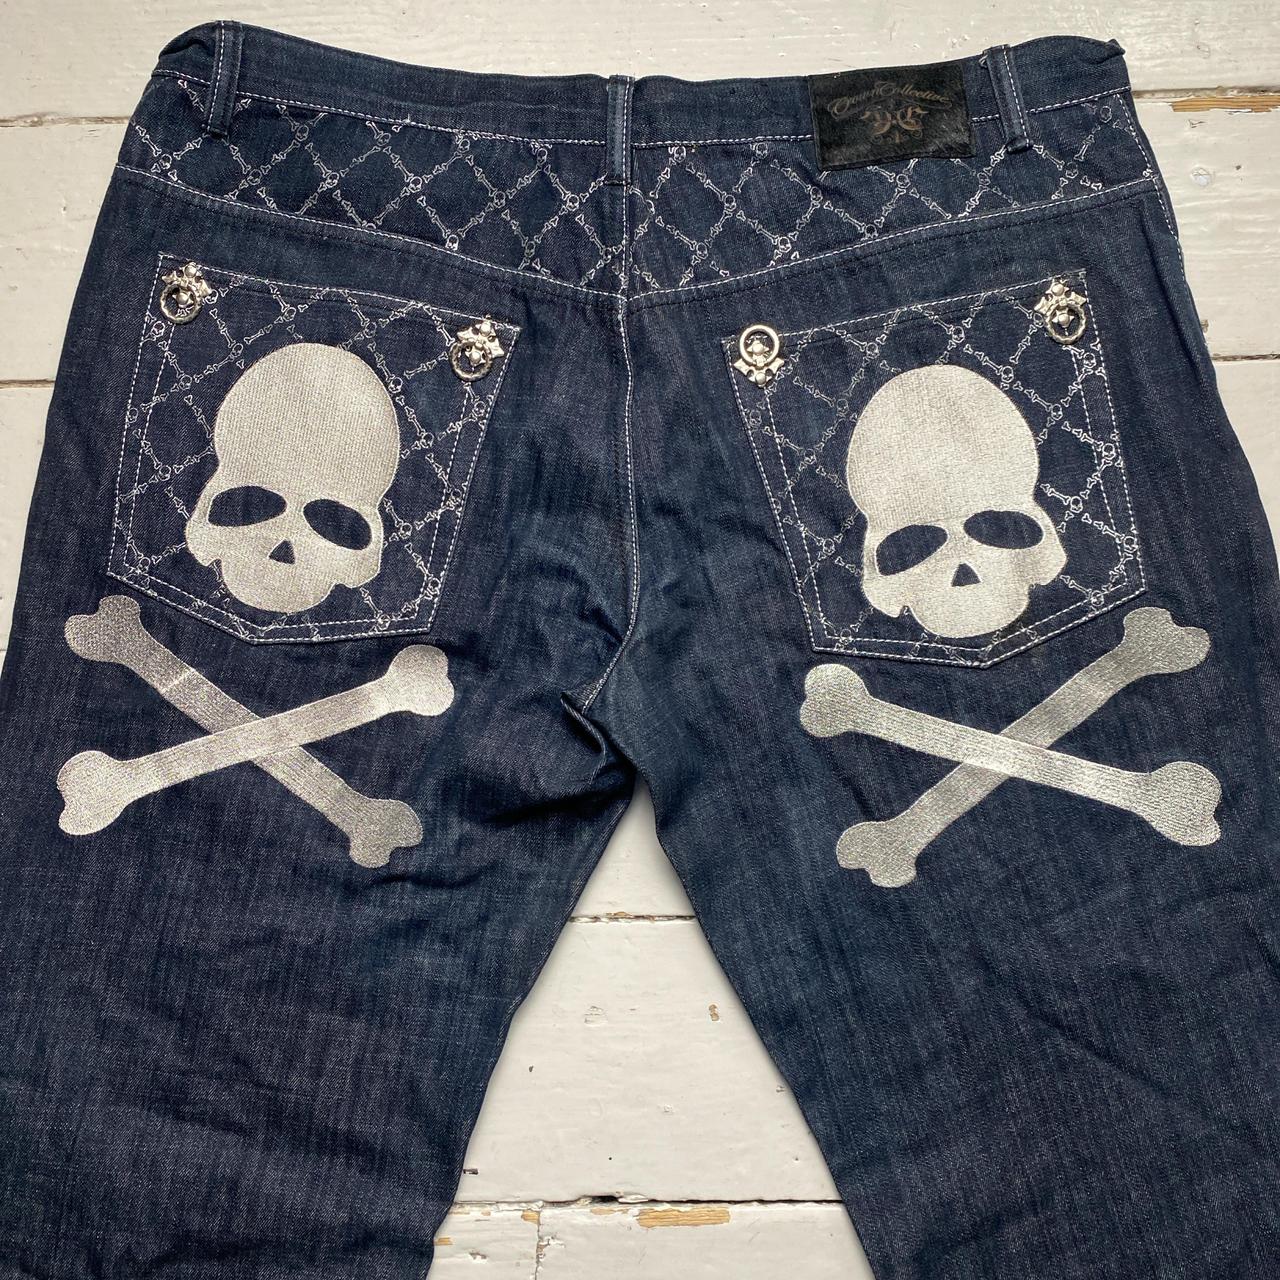 Crown Collective Baggy Skull Jeans